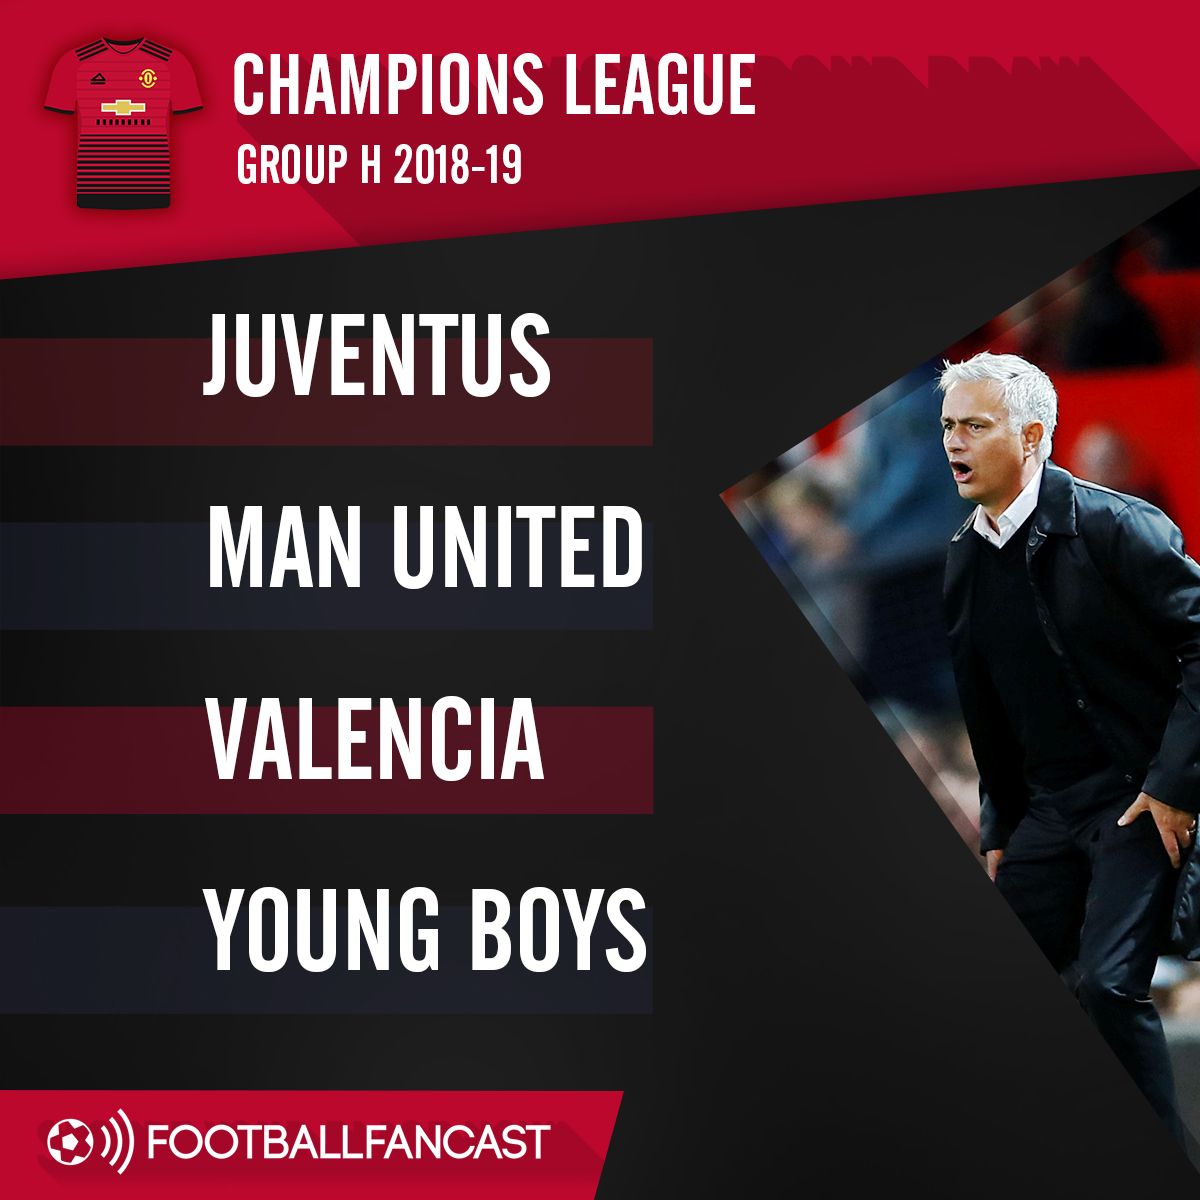 Manchester United's Champions League Group